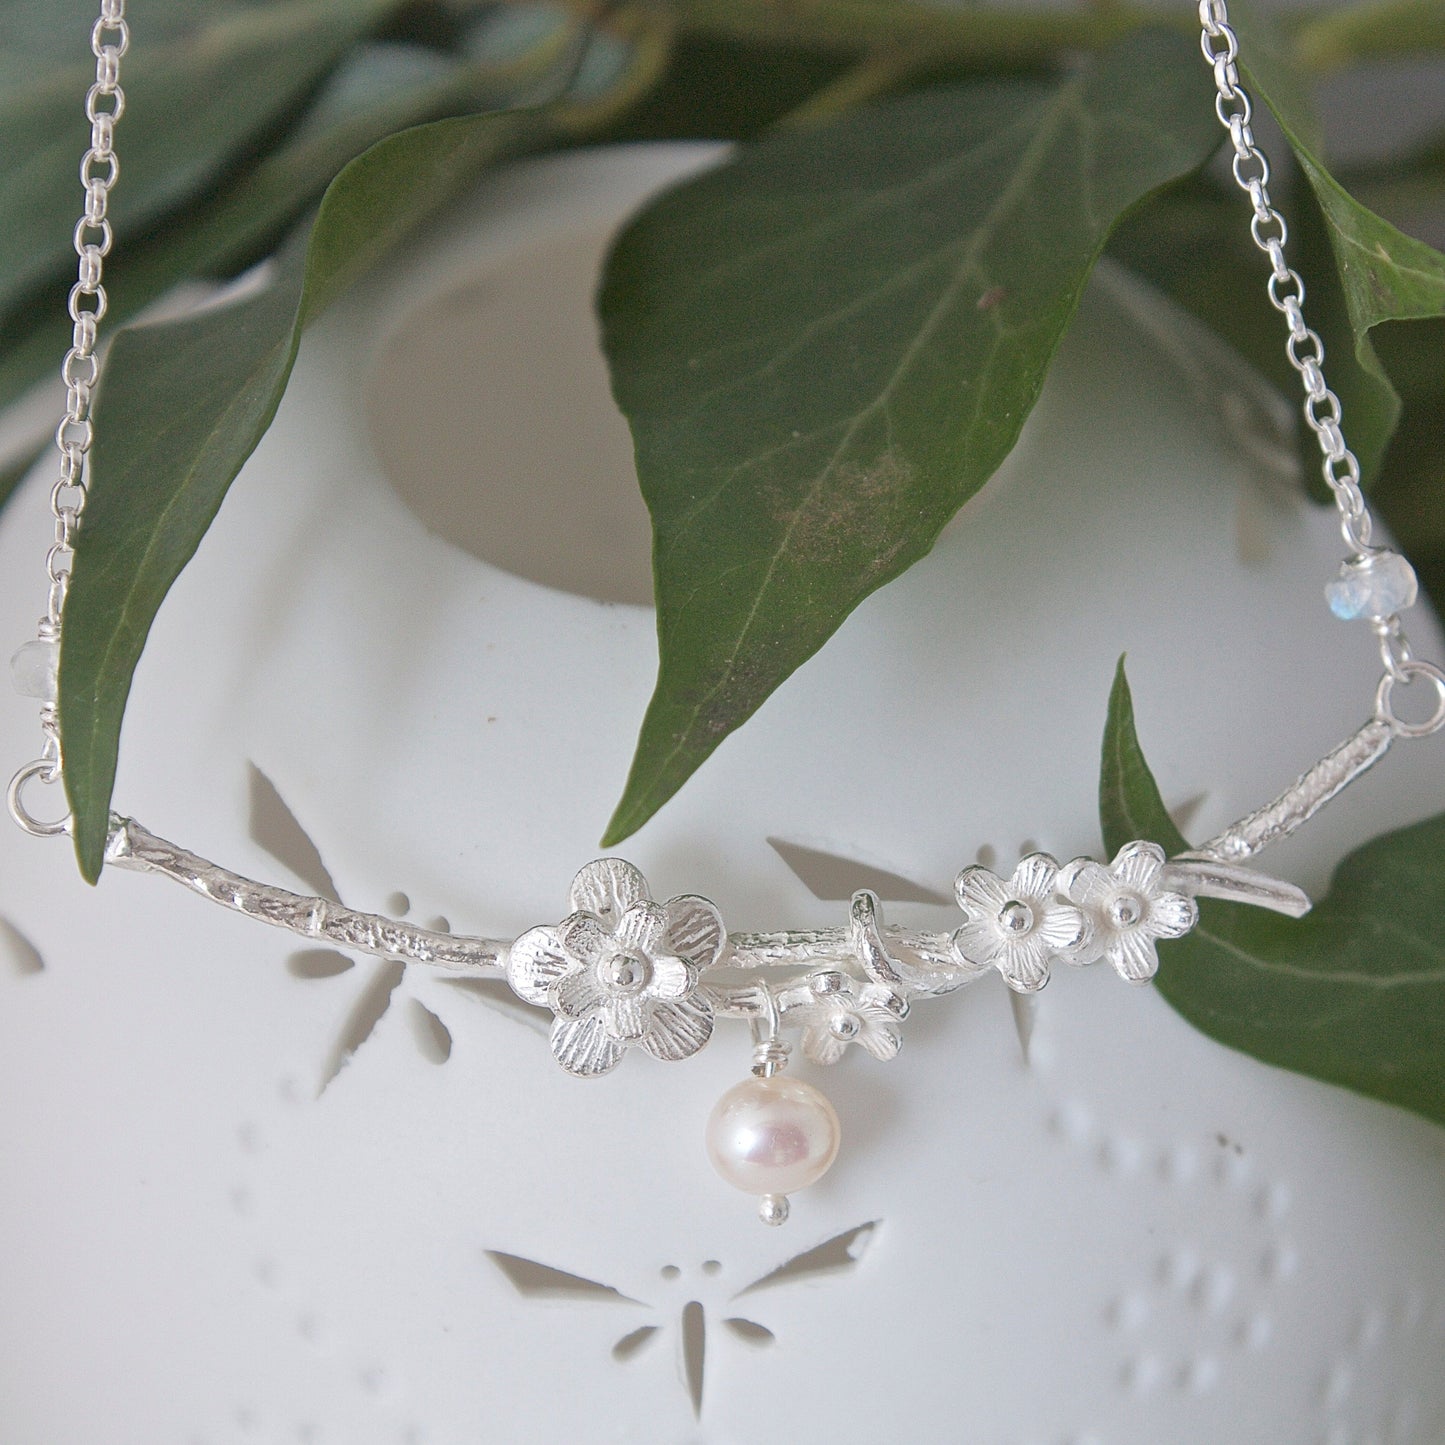 Cherry Blossom Necklace, Silver, Pearl and Moonstone Bridal Necklace